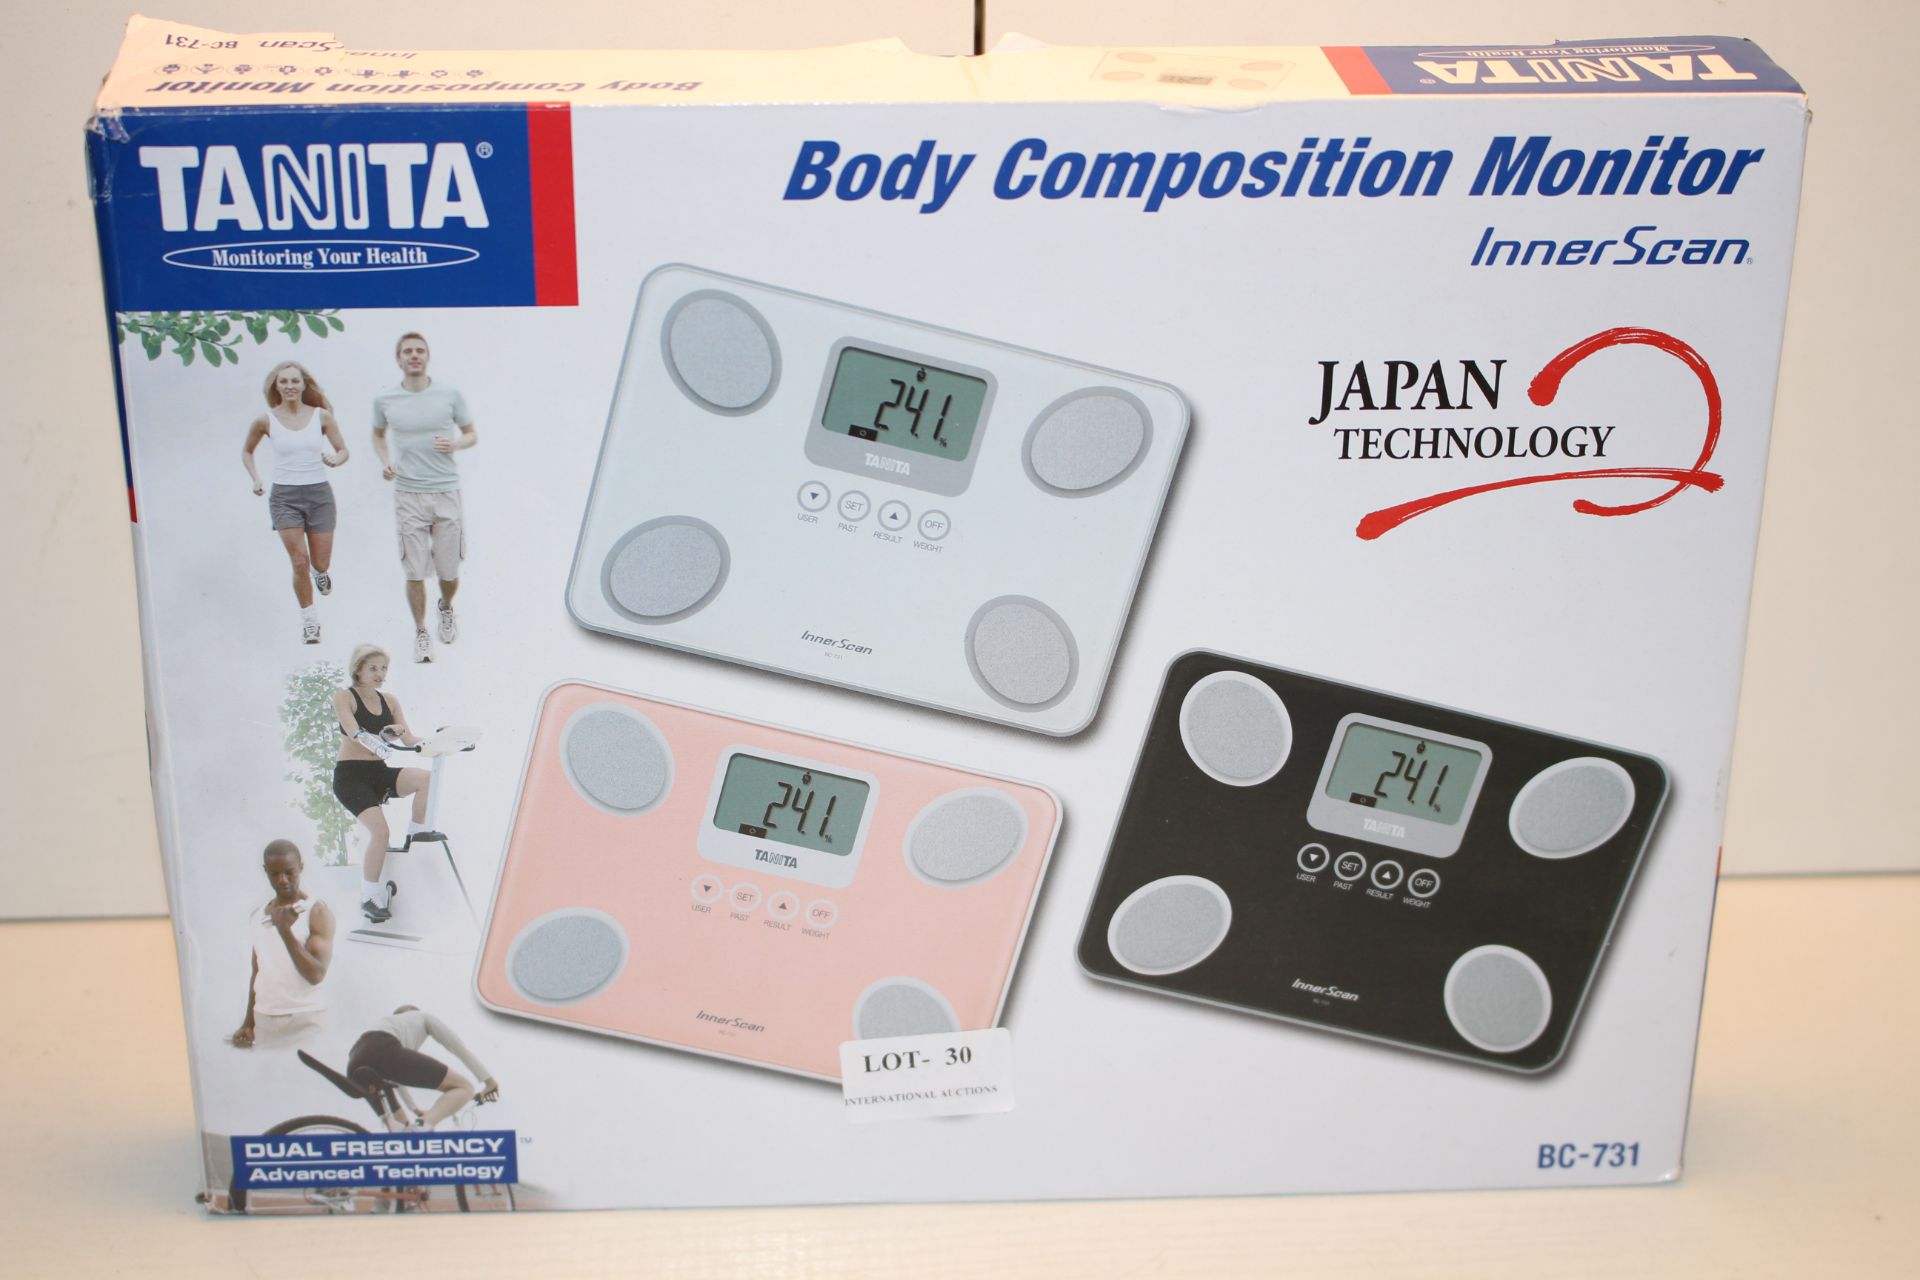 BOXED TANITA BODY COMPOSITION MONITOR INNERSCAN MODEL: BC-731 RRP £54.99Condition ReportAppraisal